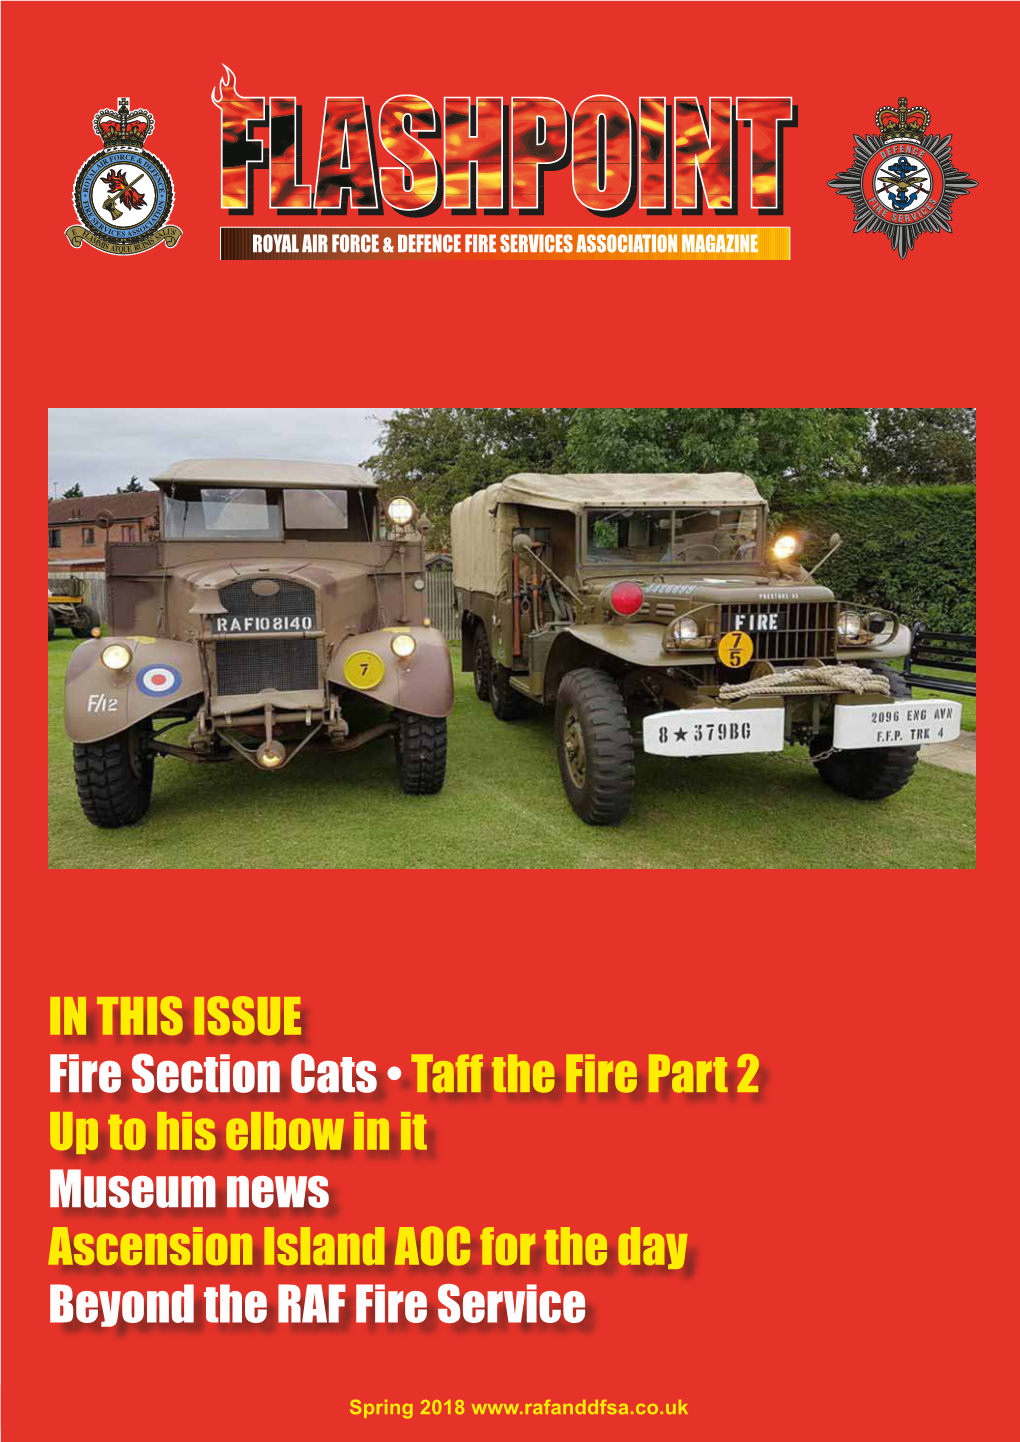 IN THIS ISSUE Fire Section Cats • Taff the Fire Part 2 up to His Elbow in It Museum News Ascension Island AOC for the Day Beyond the RAF Fire Service